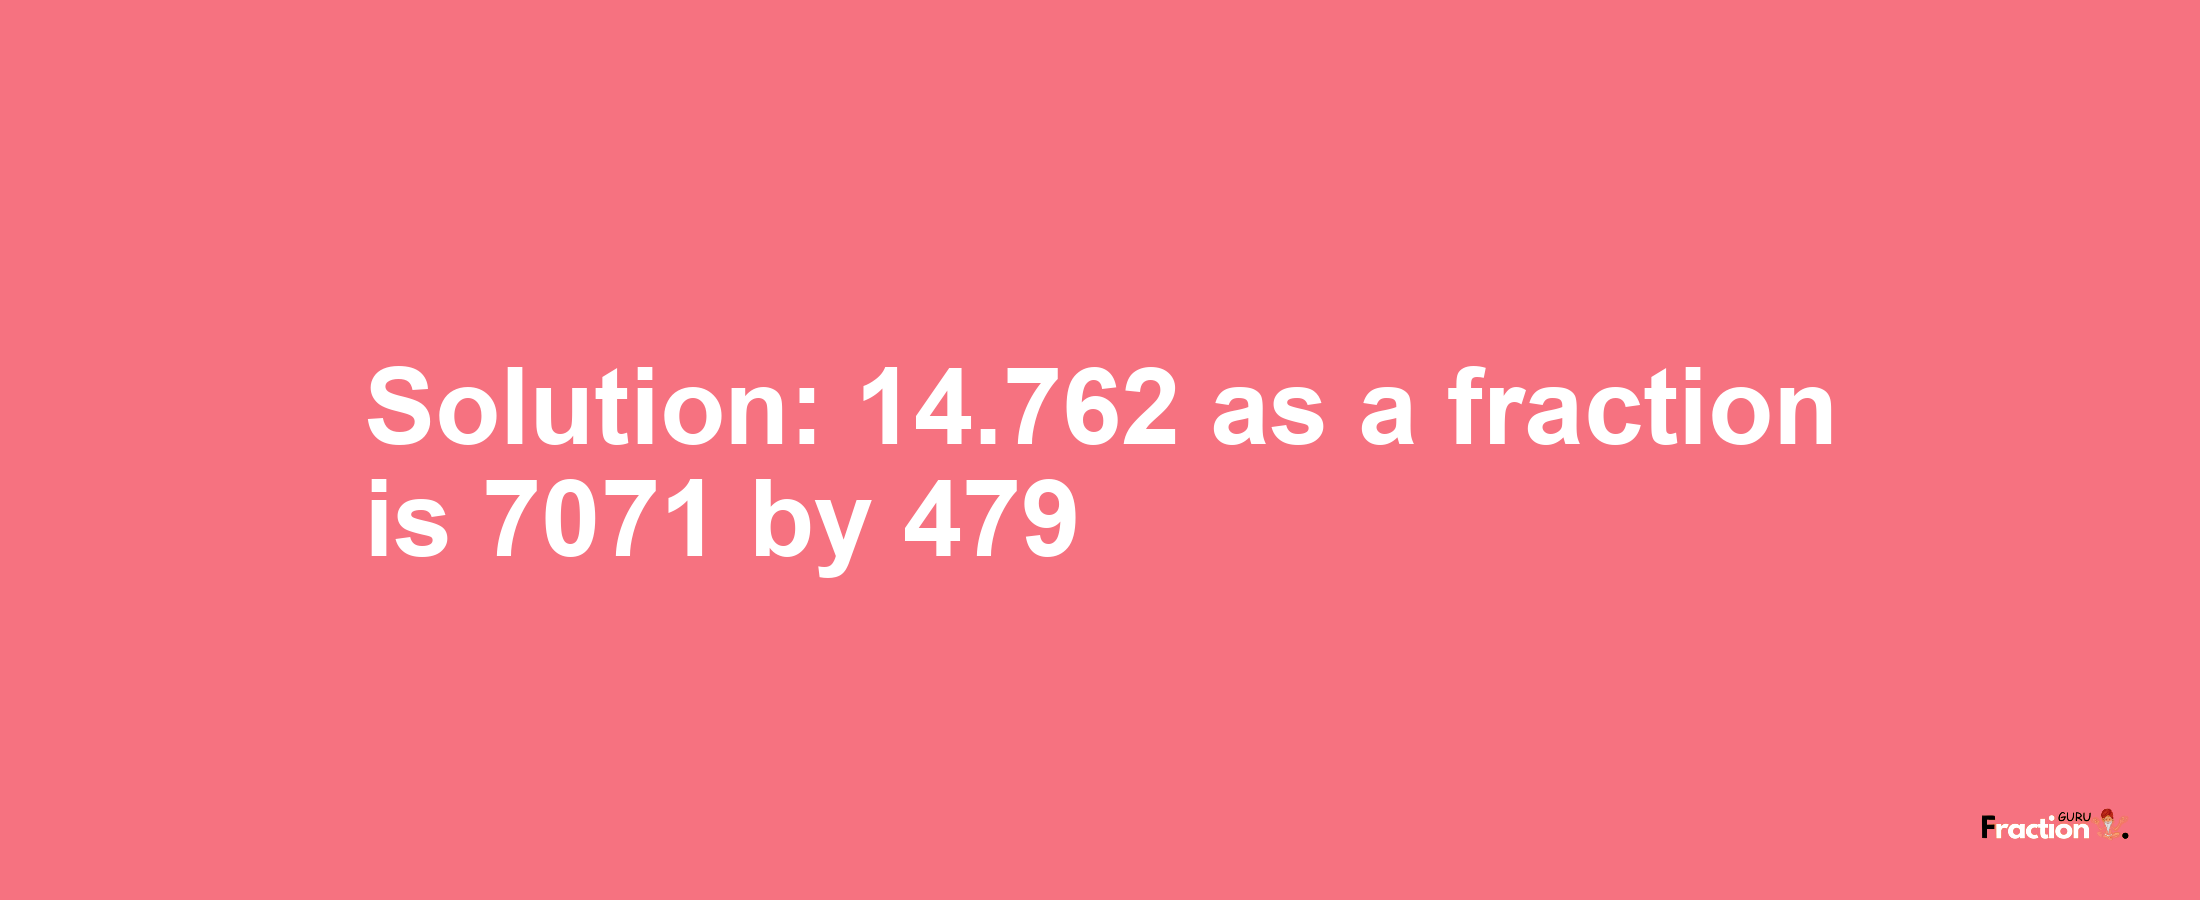 Solution:14.762 as a fraction is 7071/479